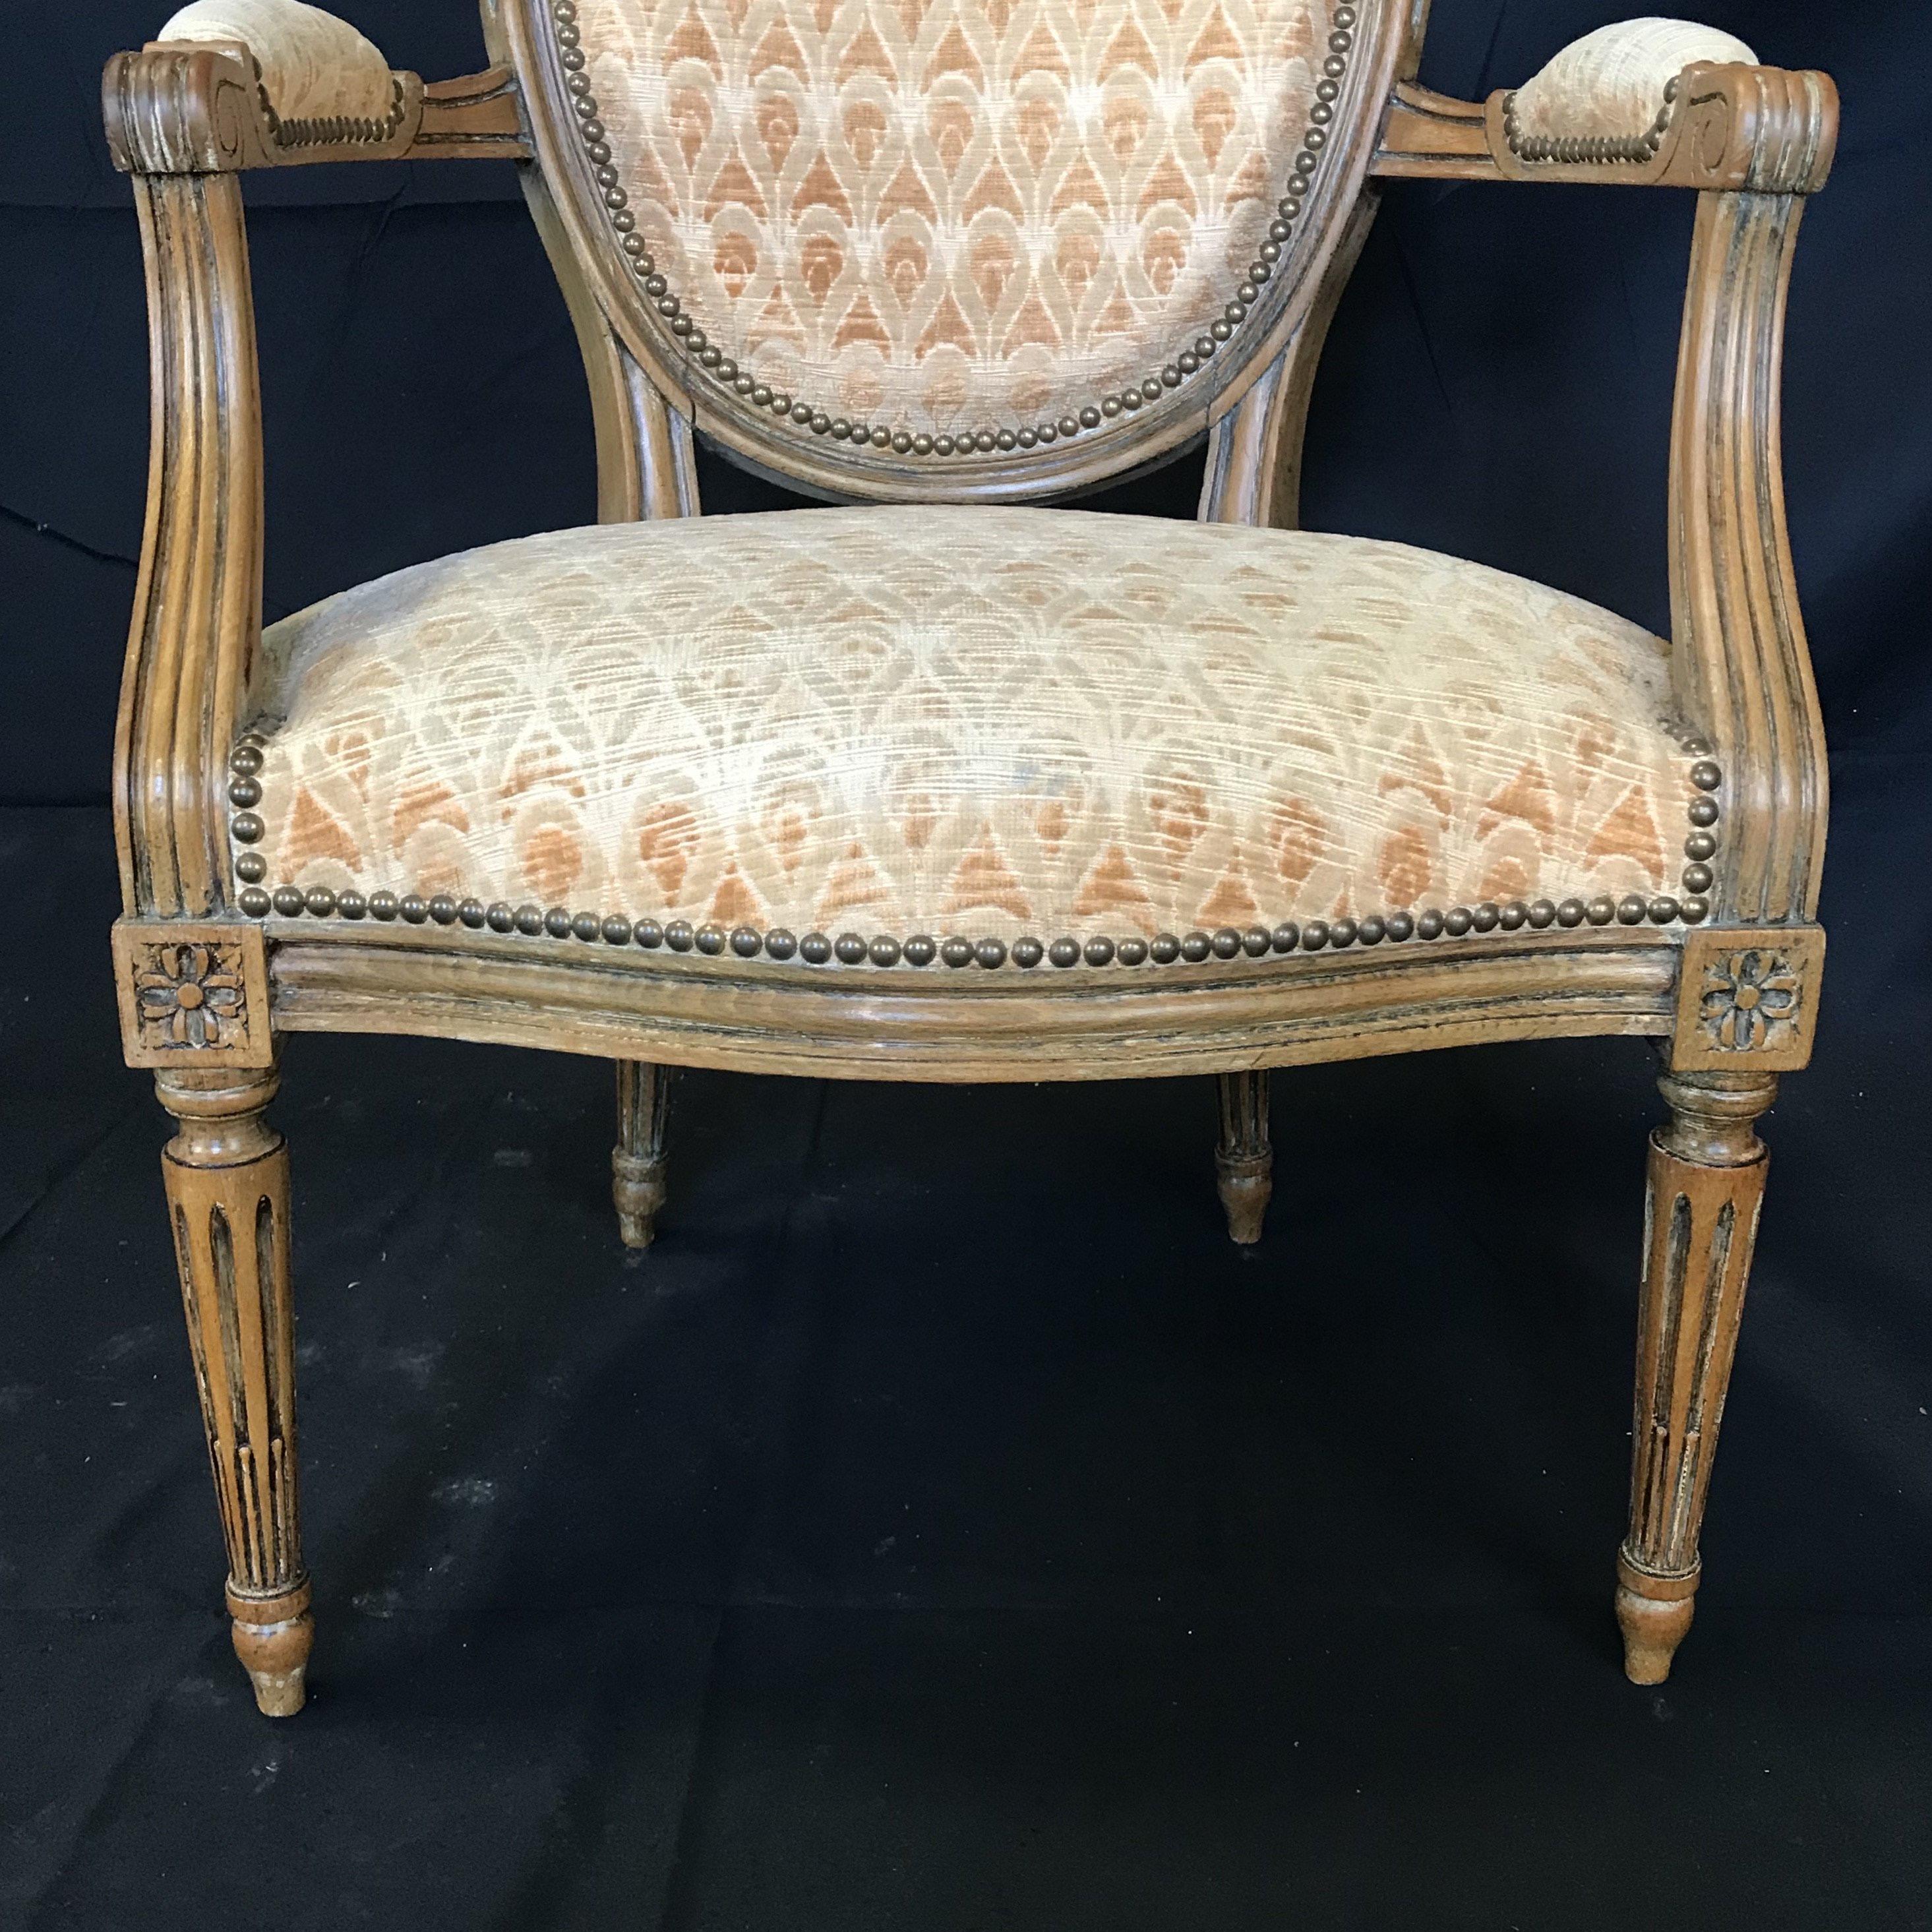 Beautiful pair of Louis XVI armchairs or fauteuils having their original pale gold upholstery in great condition! A great size for accent chairs, armchairs or end accent dining chairs.
#4768.
   